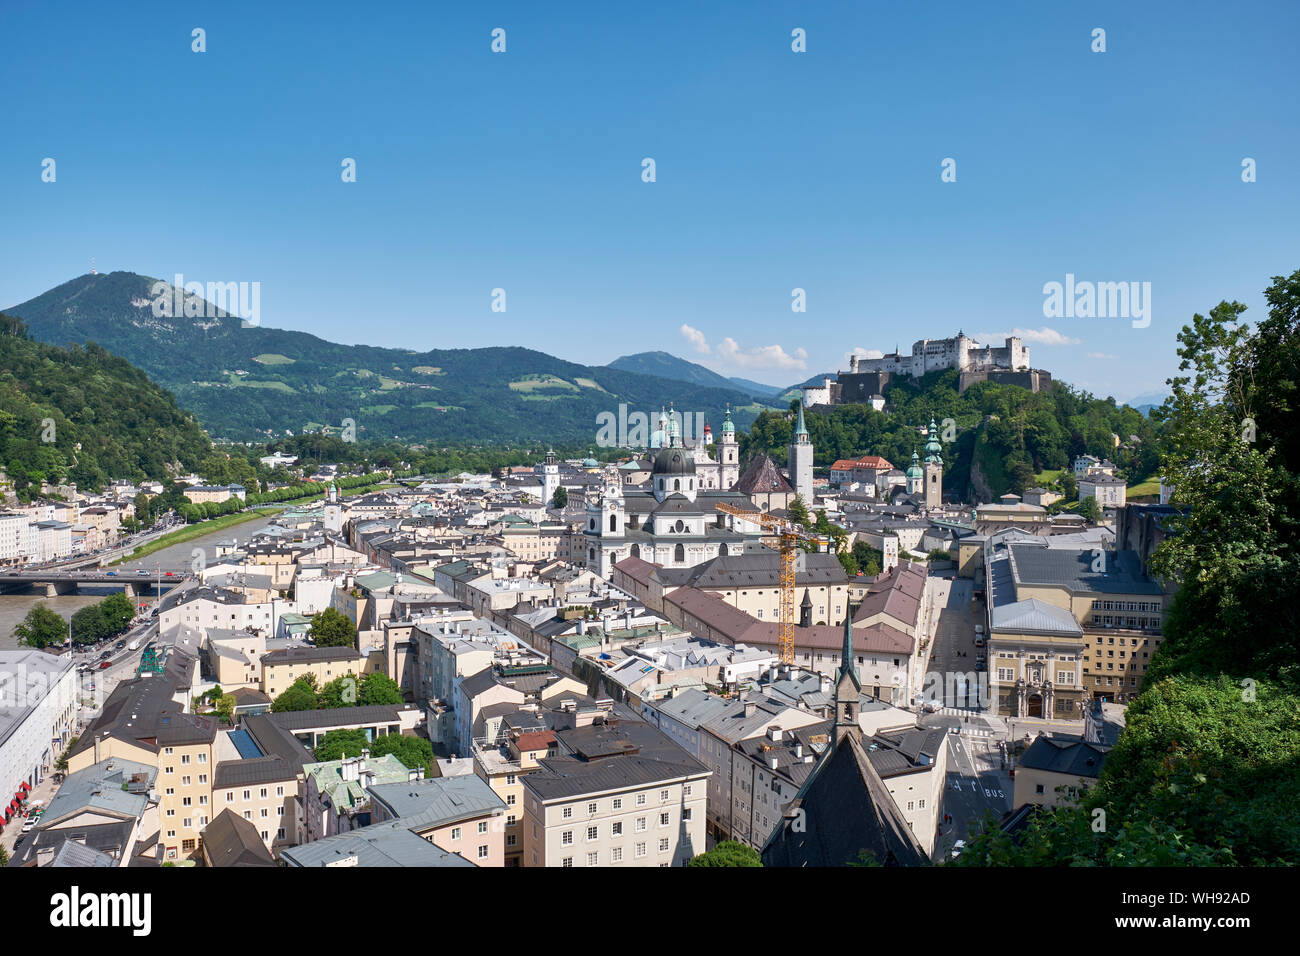 View from Moenchsberg to old town, Salzburg, Austria Stock Photo